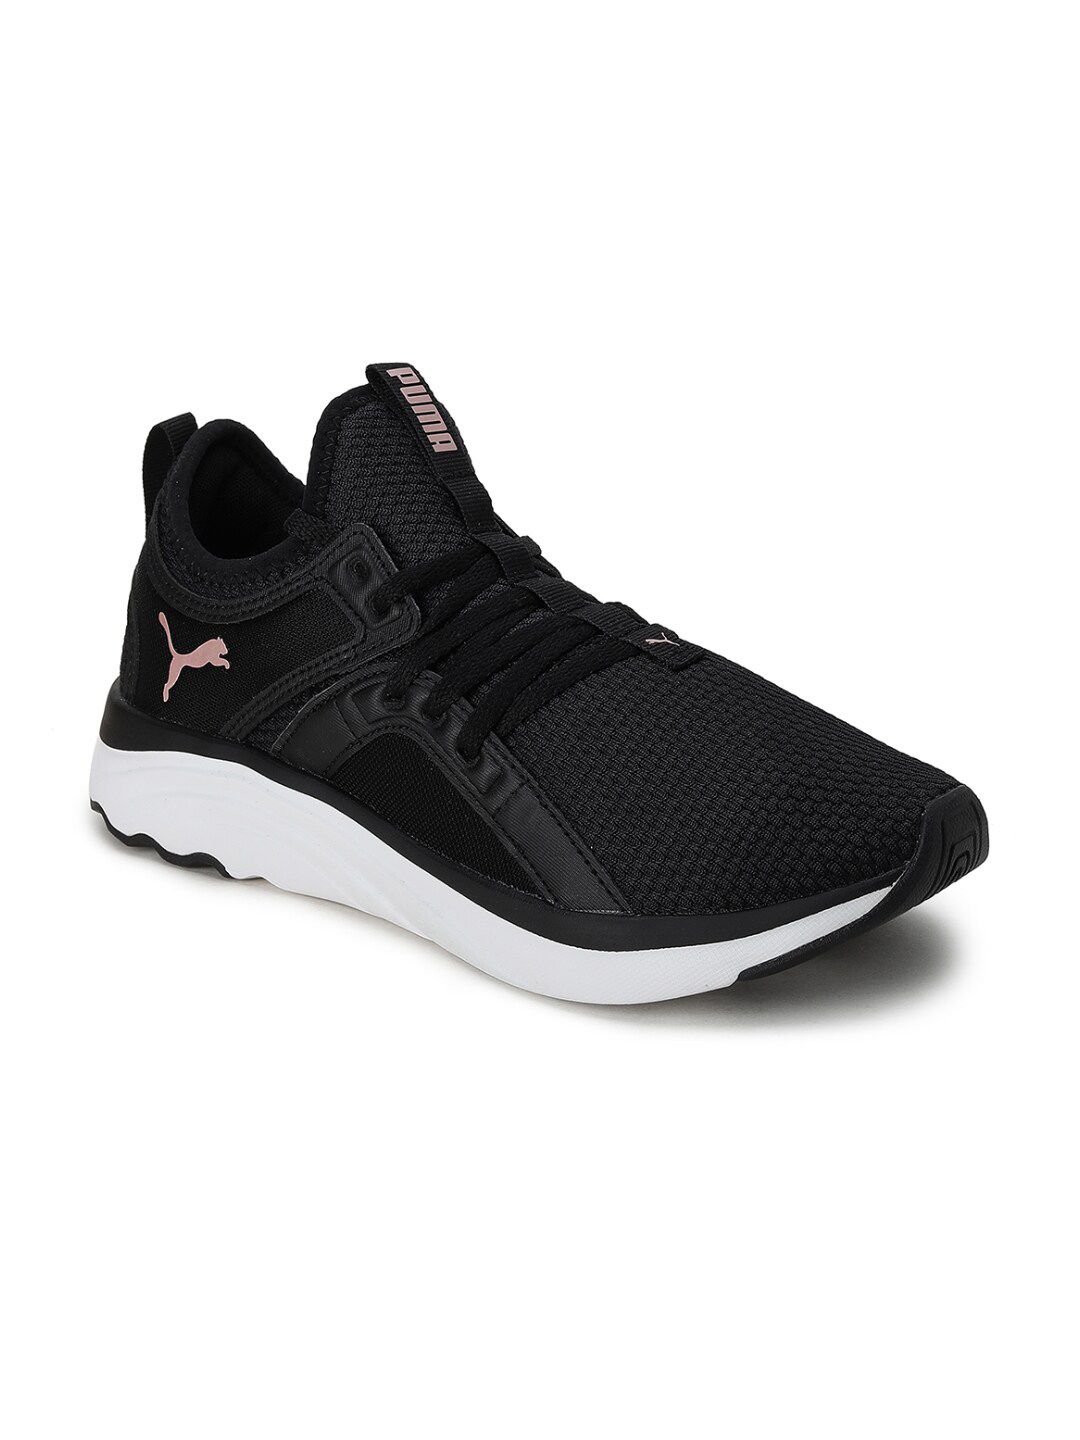 Puma Women Black Sports Shoes Price in India